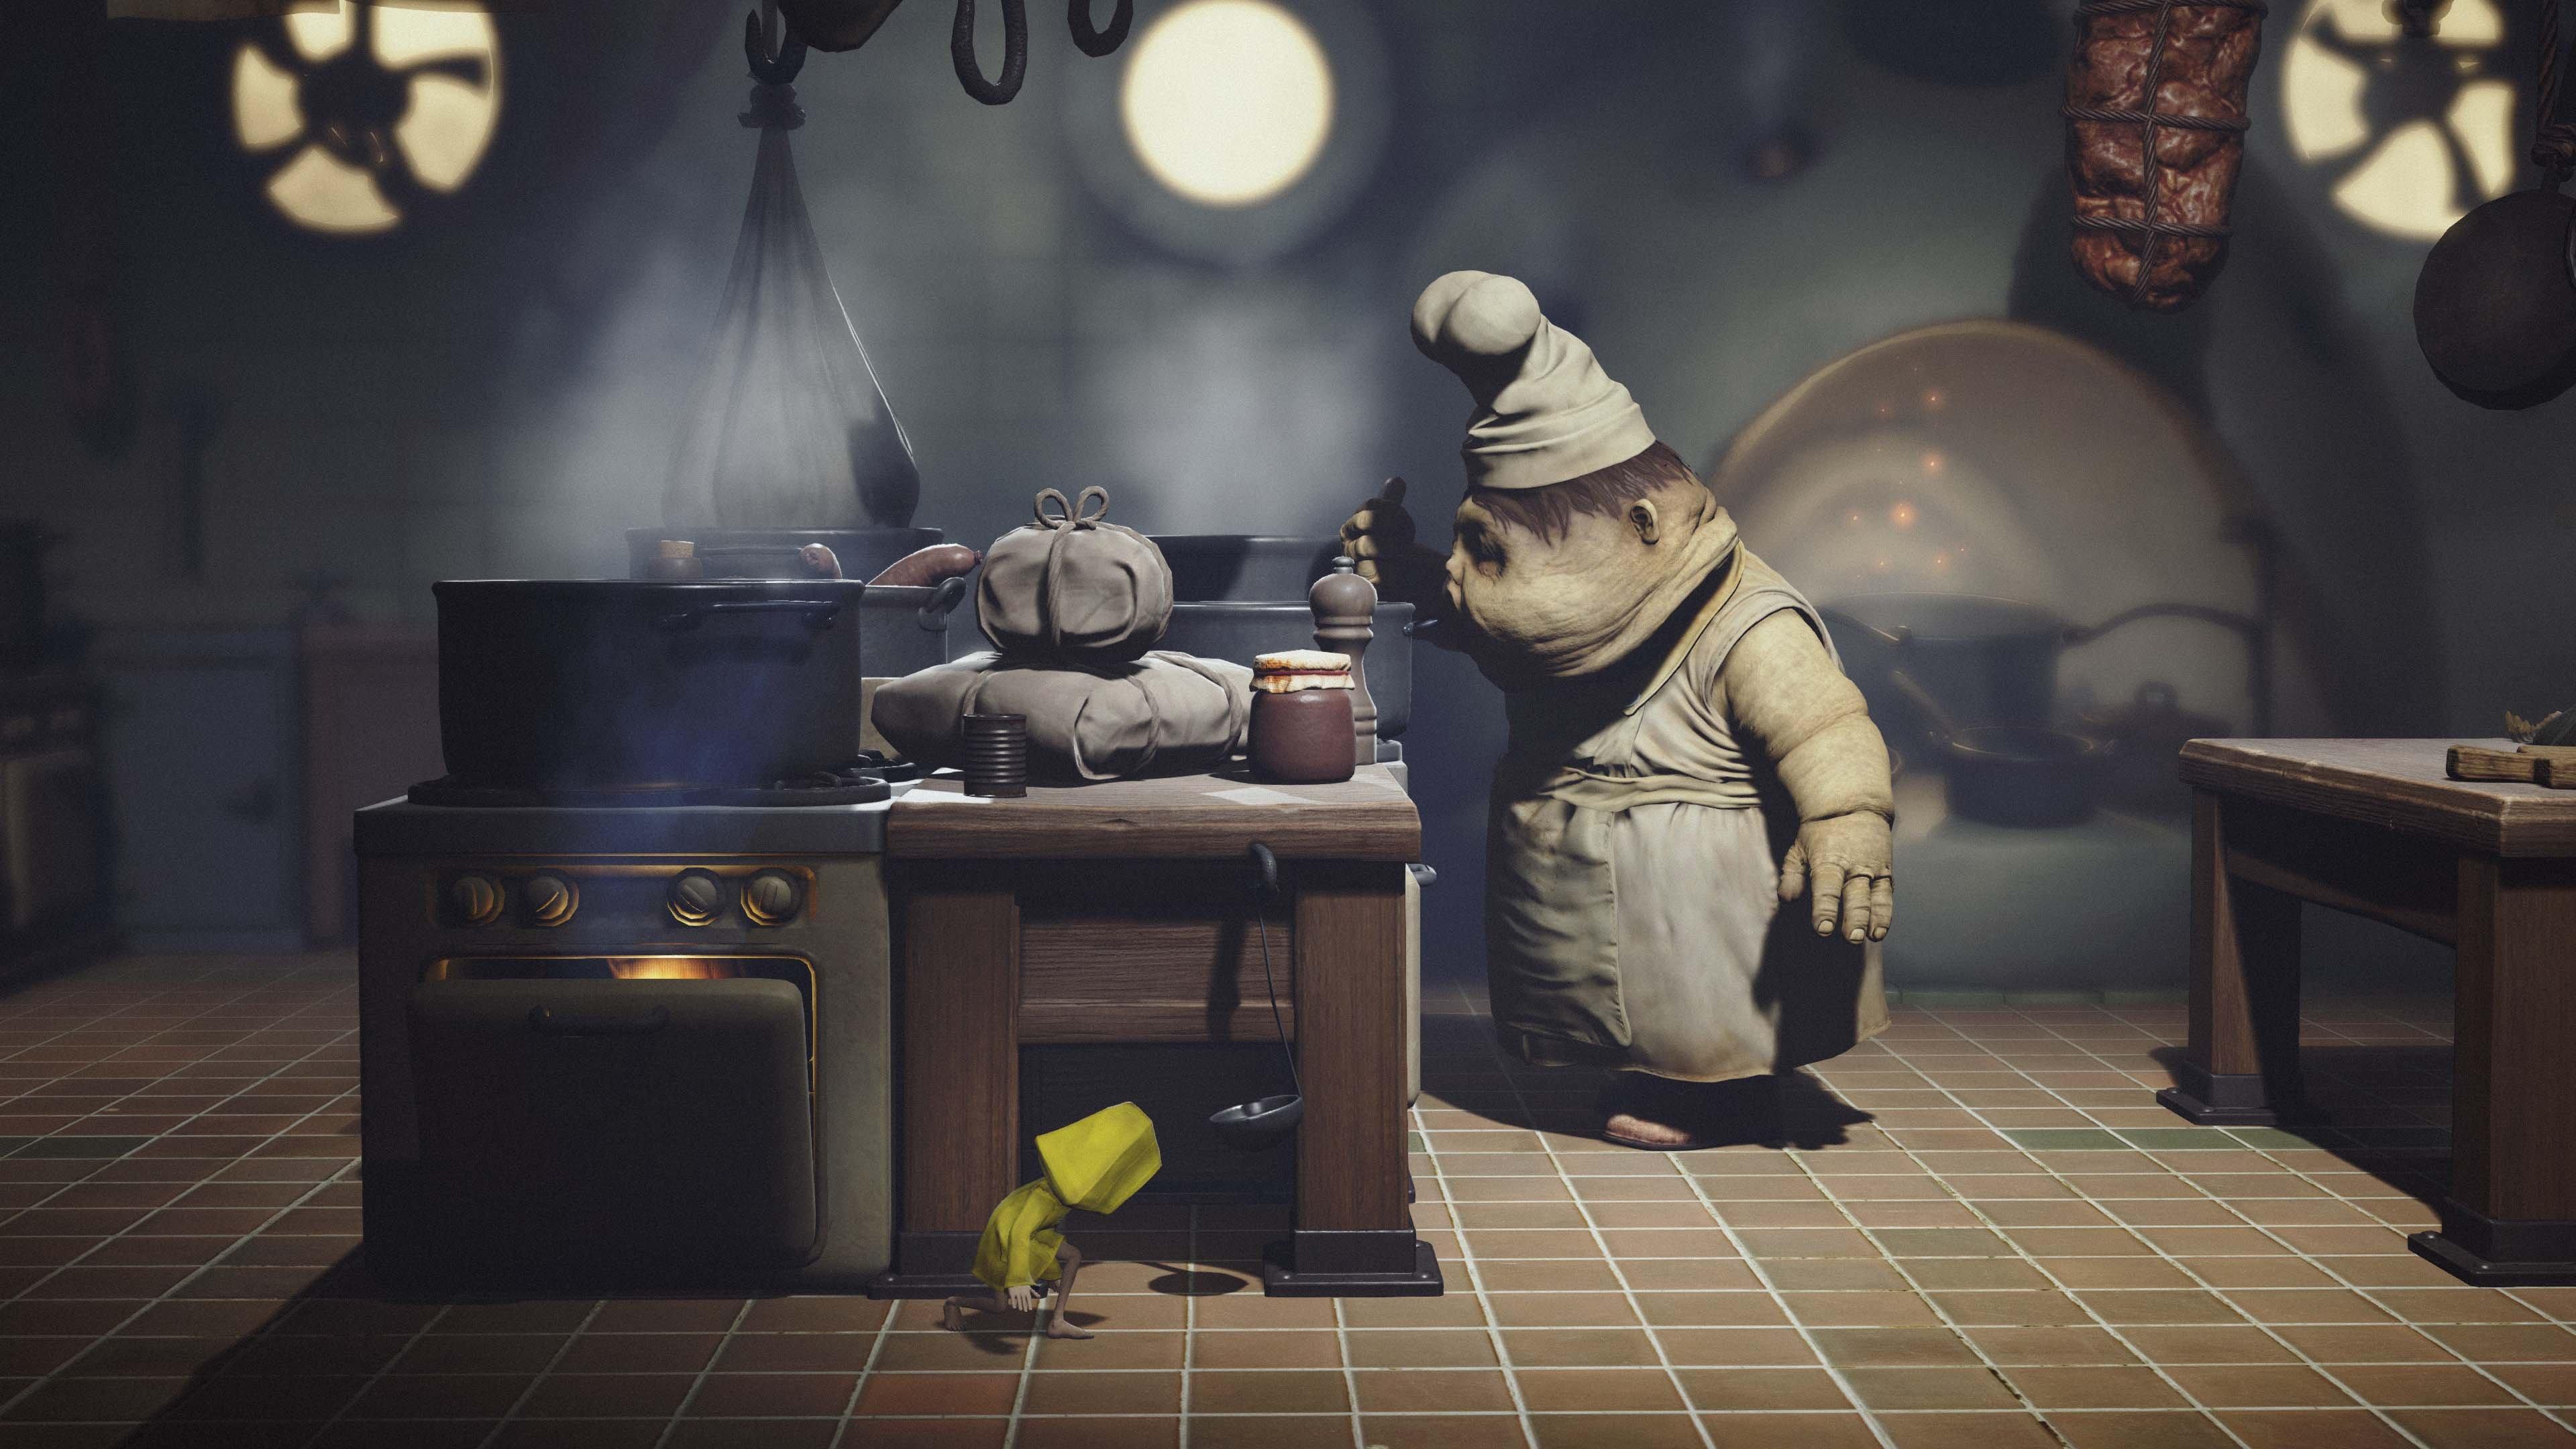 Little Nightmares Six Edition Game Only Playstation 4 Gamestop - #U0e0b#U0e2d#U0e17#U0e44#U0e2b#U0e19 6 styles boxed roblox figure pvc game action